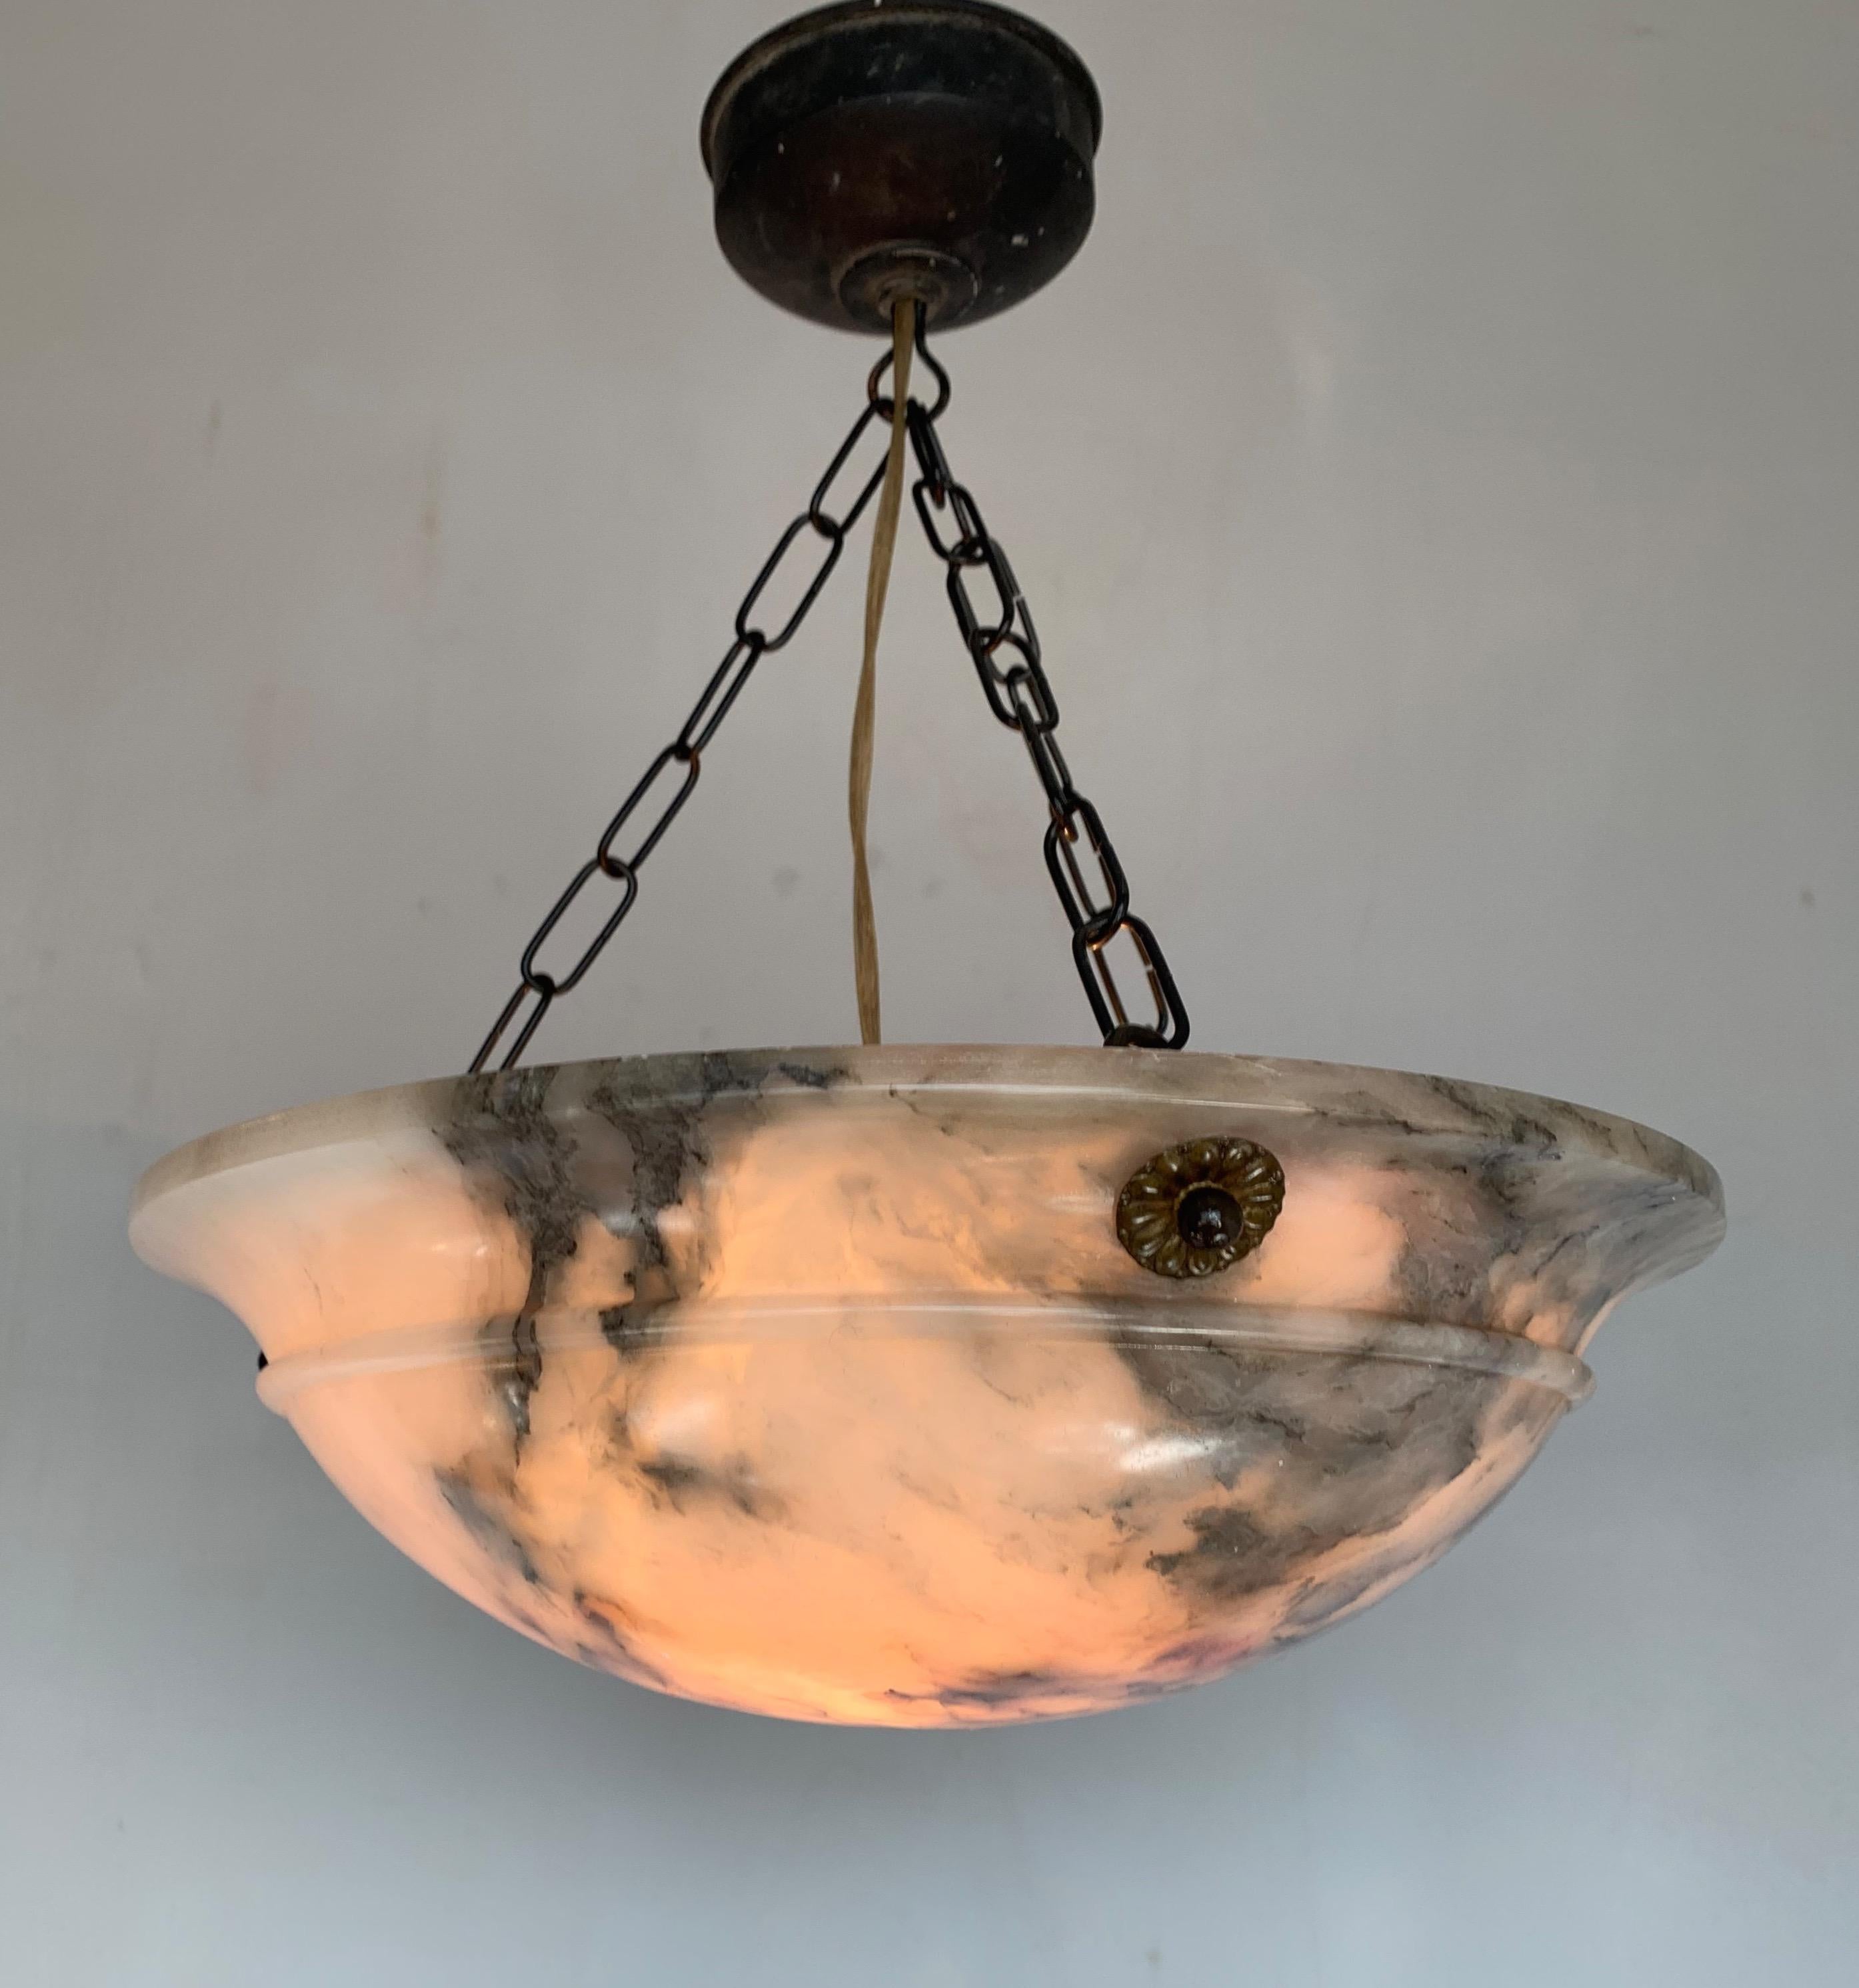 Lovely handcrafted and practical size alabaster dish / bowl pendant.

This Art Deco pendant has a beautiful and timeless shape, but what makes this particular pendant really rare is its many 'faces'. This alabaster light has a different look from